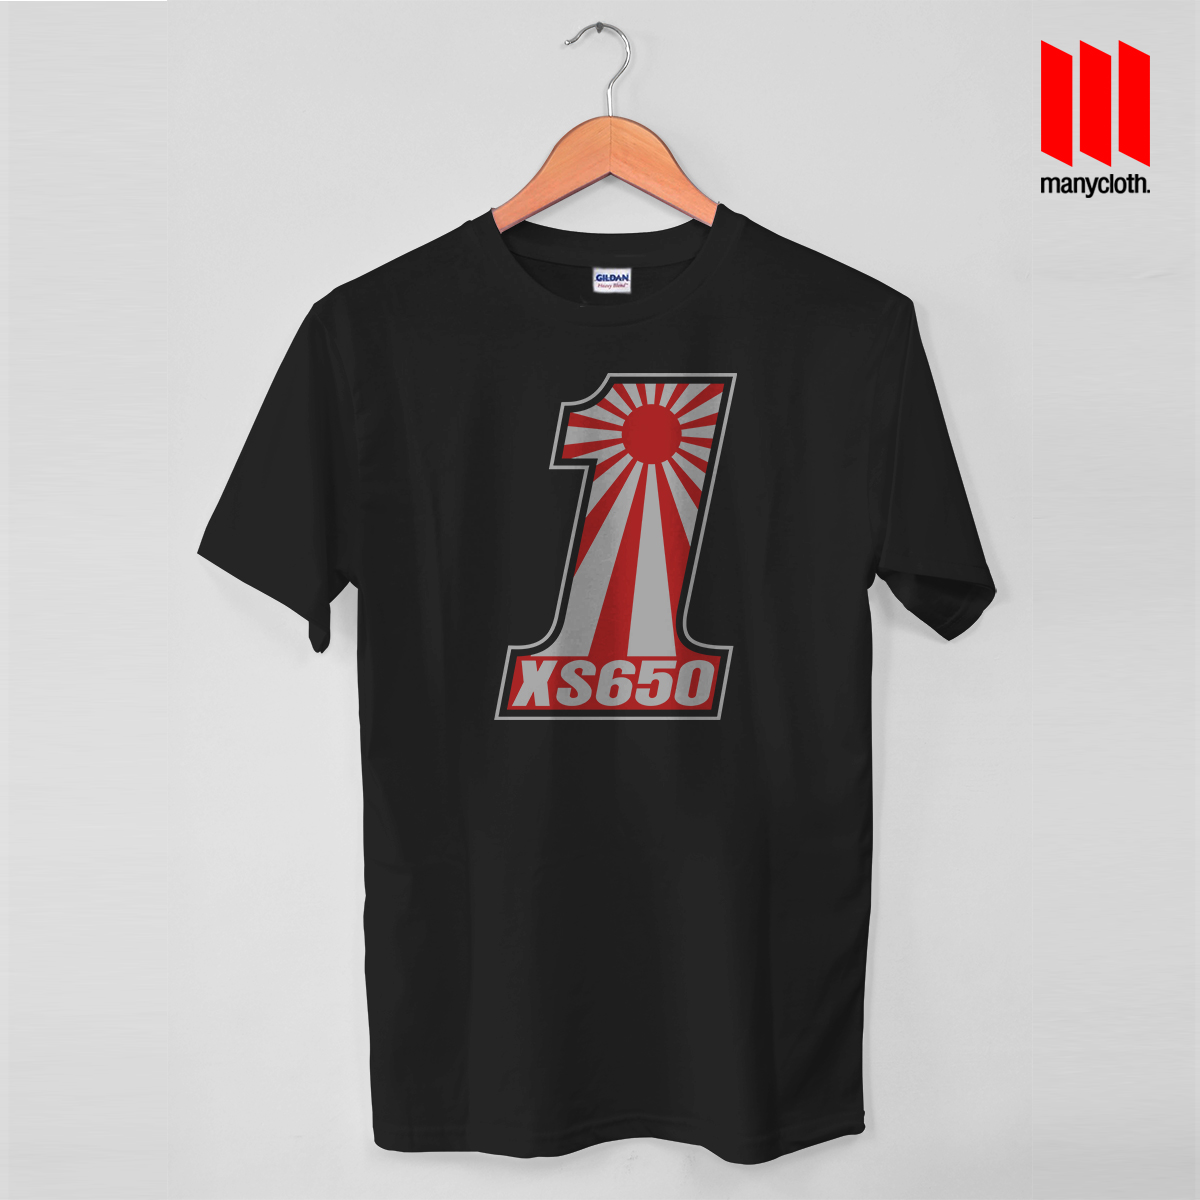 The Legendary Japan Engine T Shirt is the best and cheap designs clothing